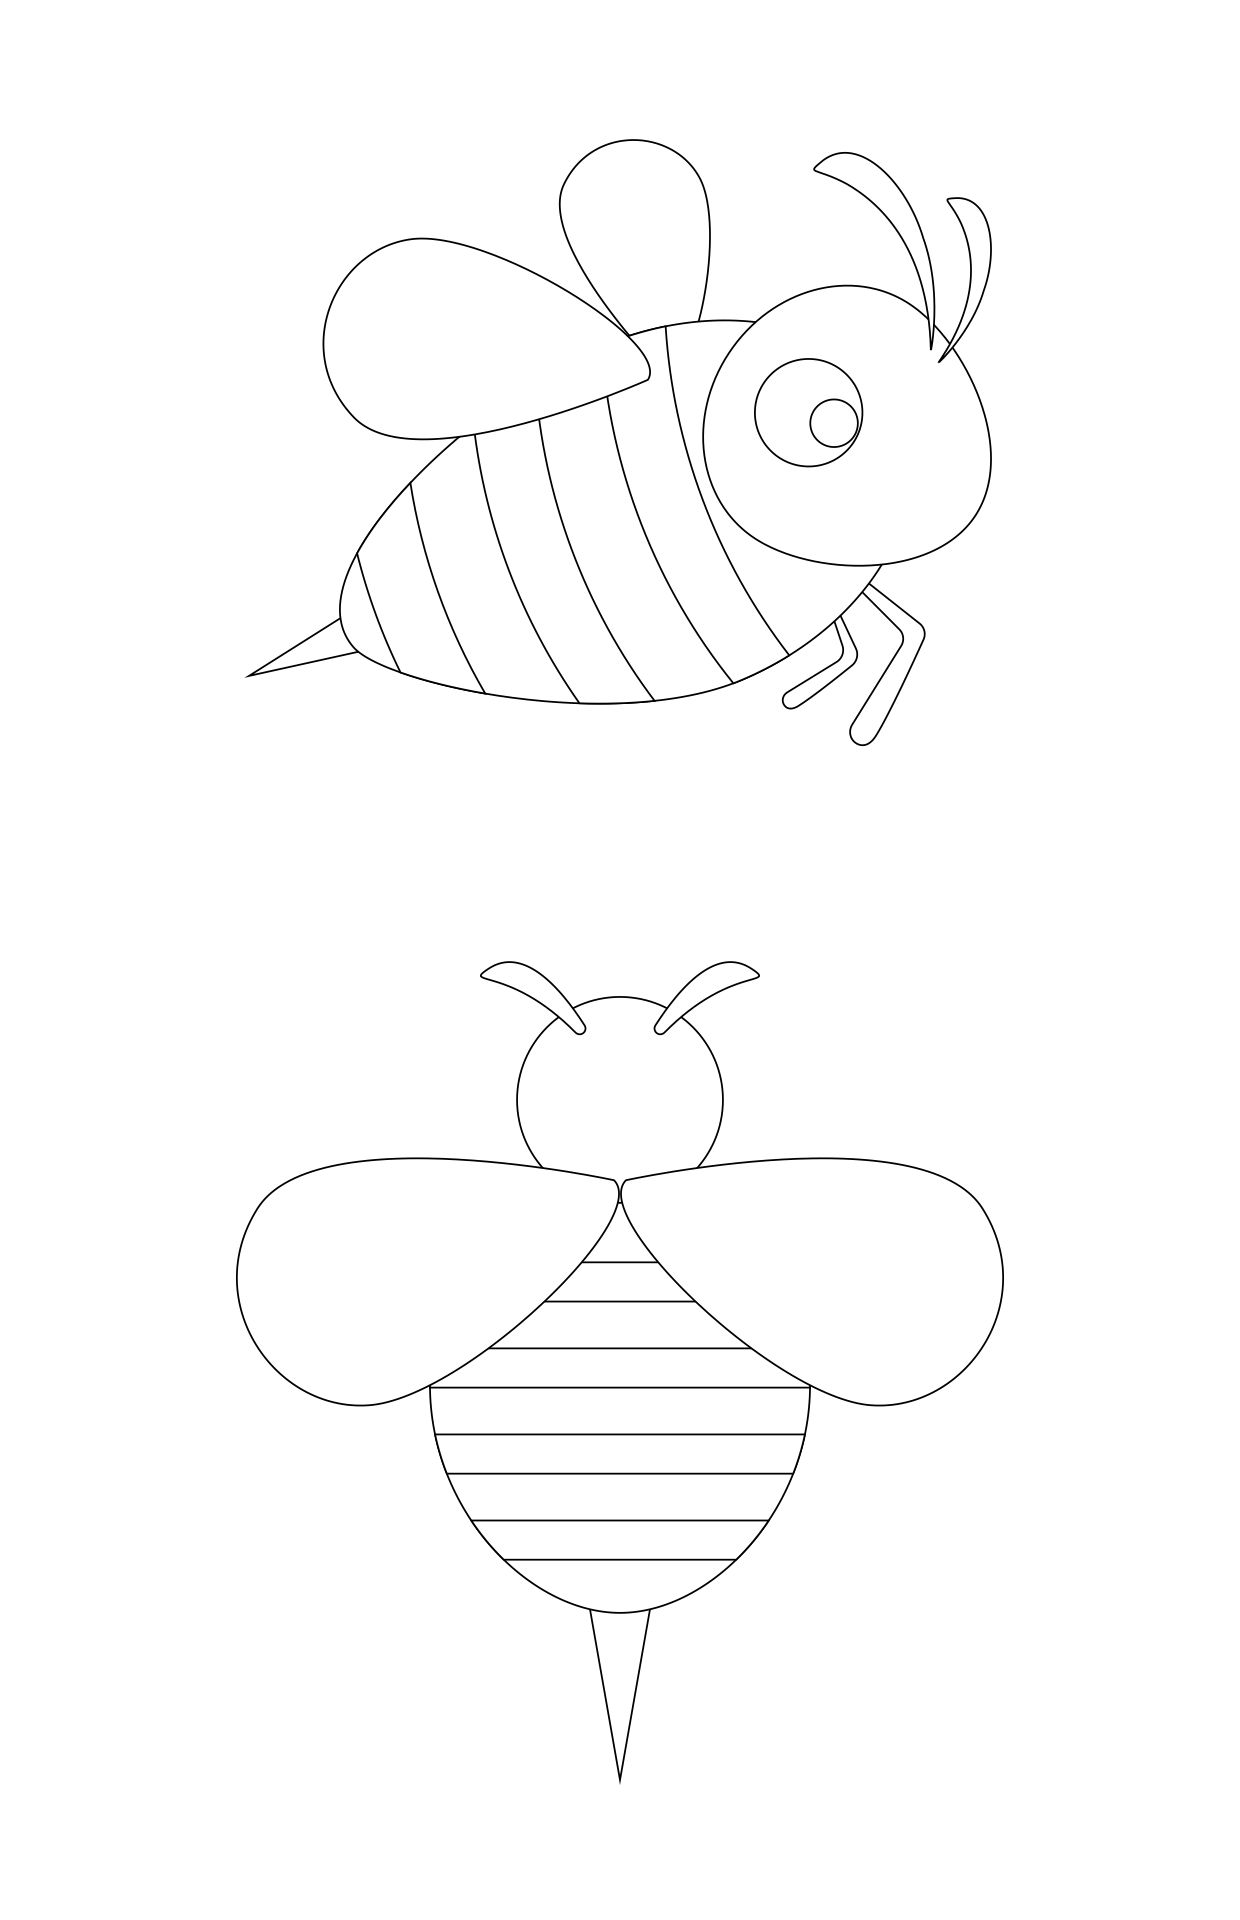 8 Best Images of Printable Animal Shapes Templates Free Bee Templates